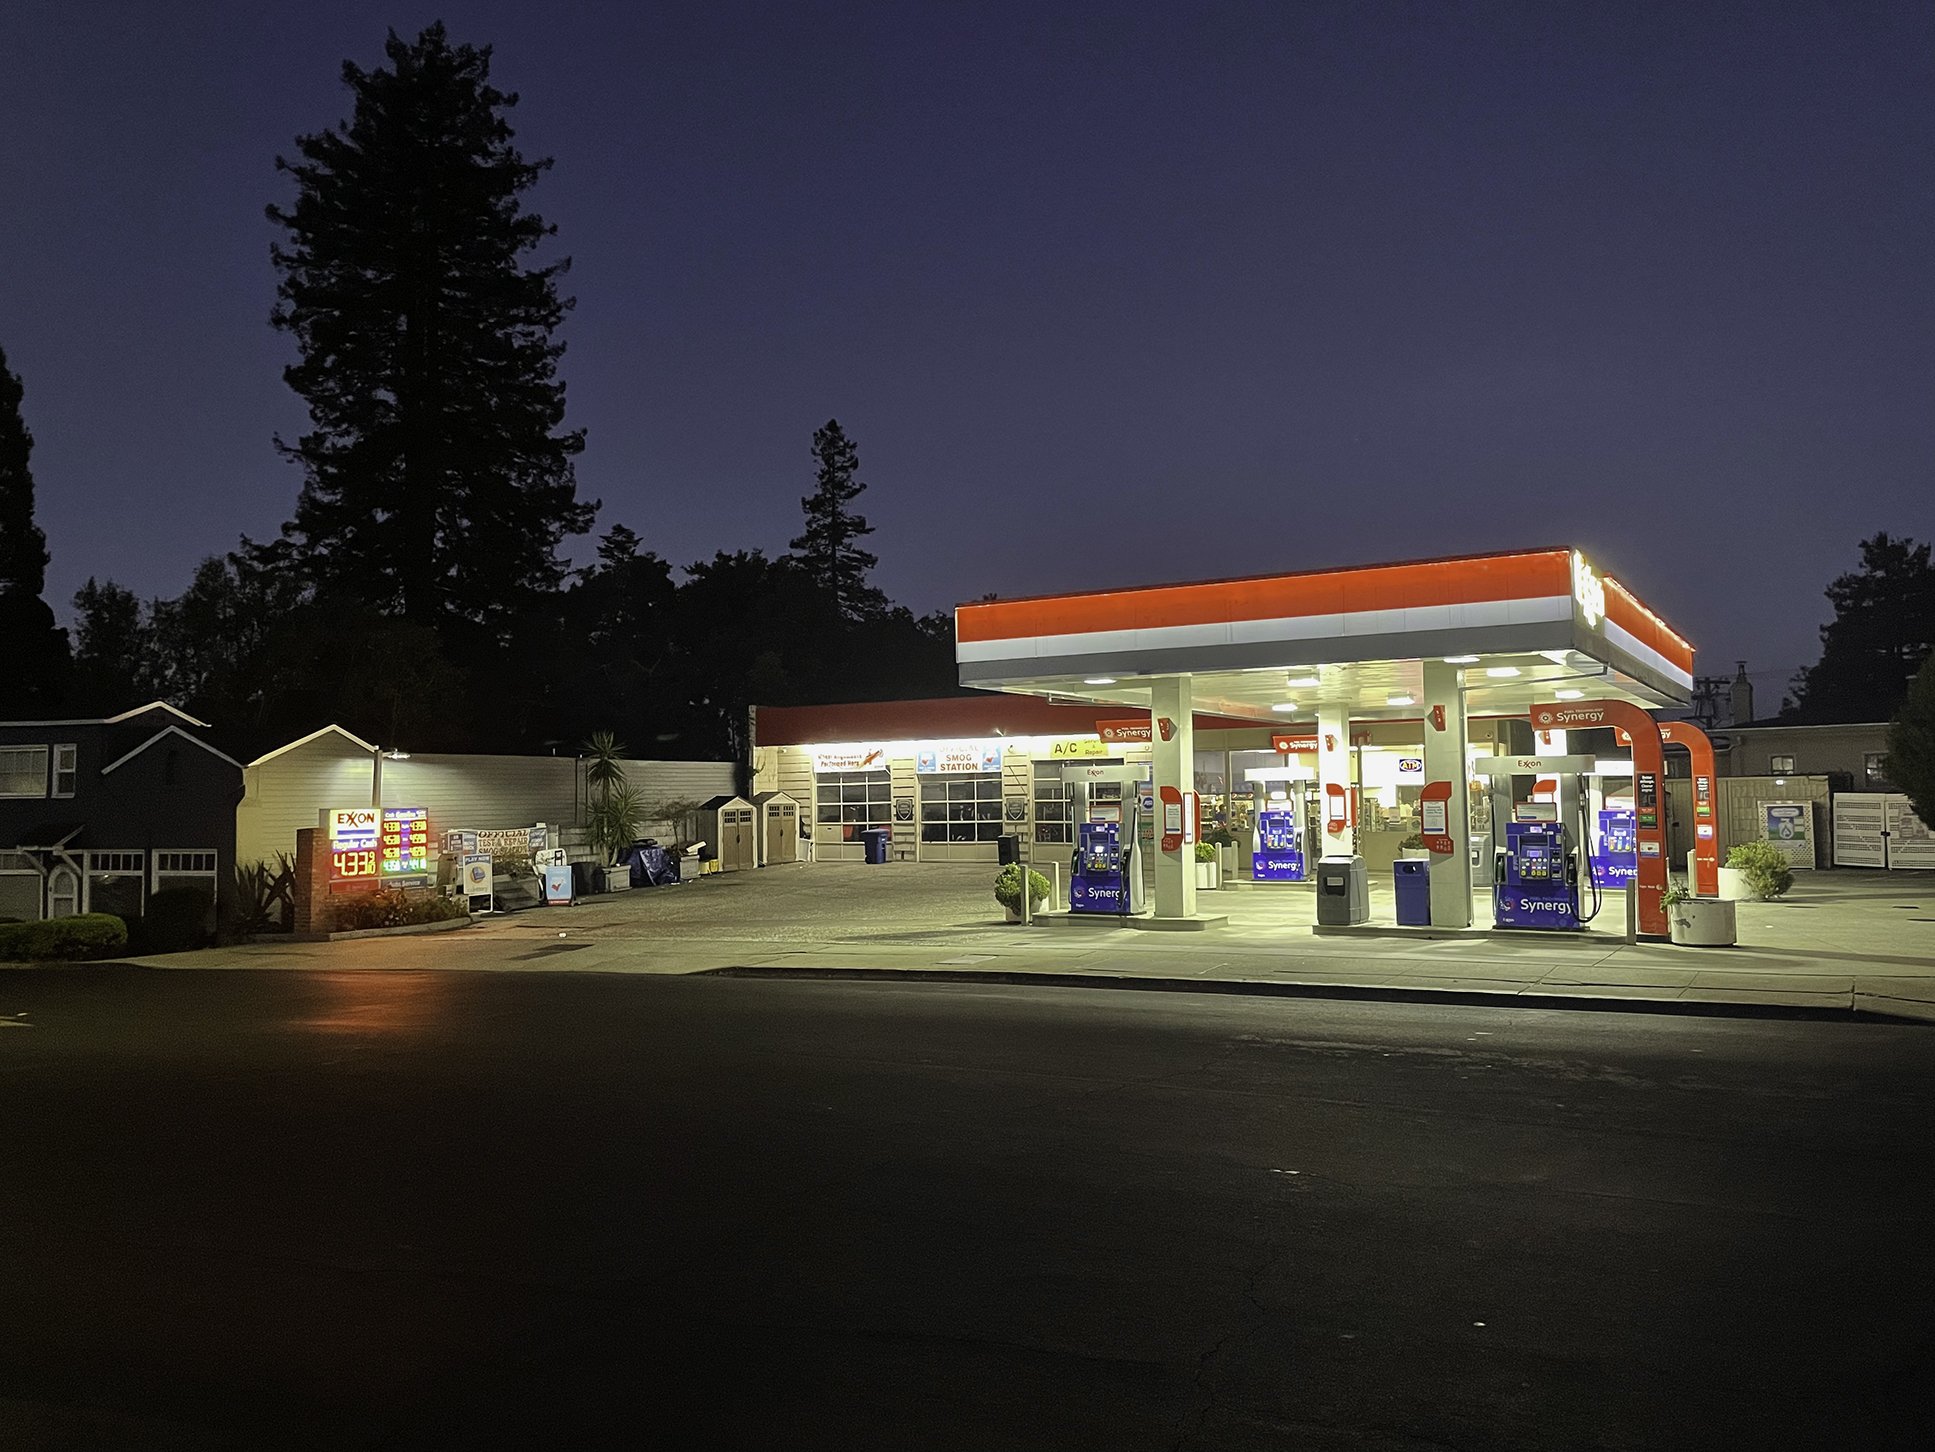 The local gas station